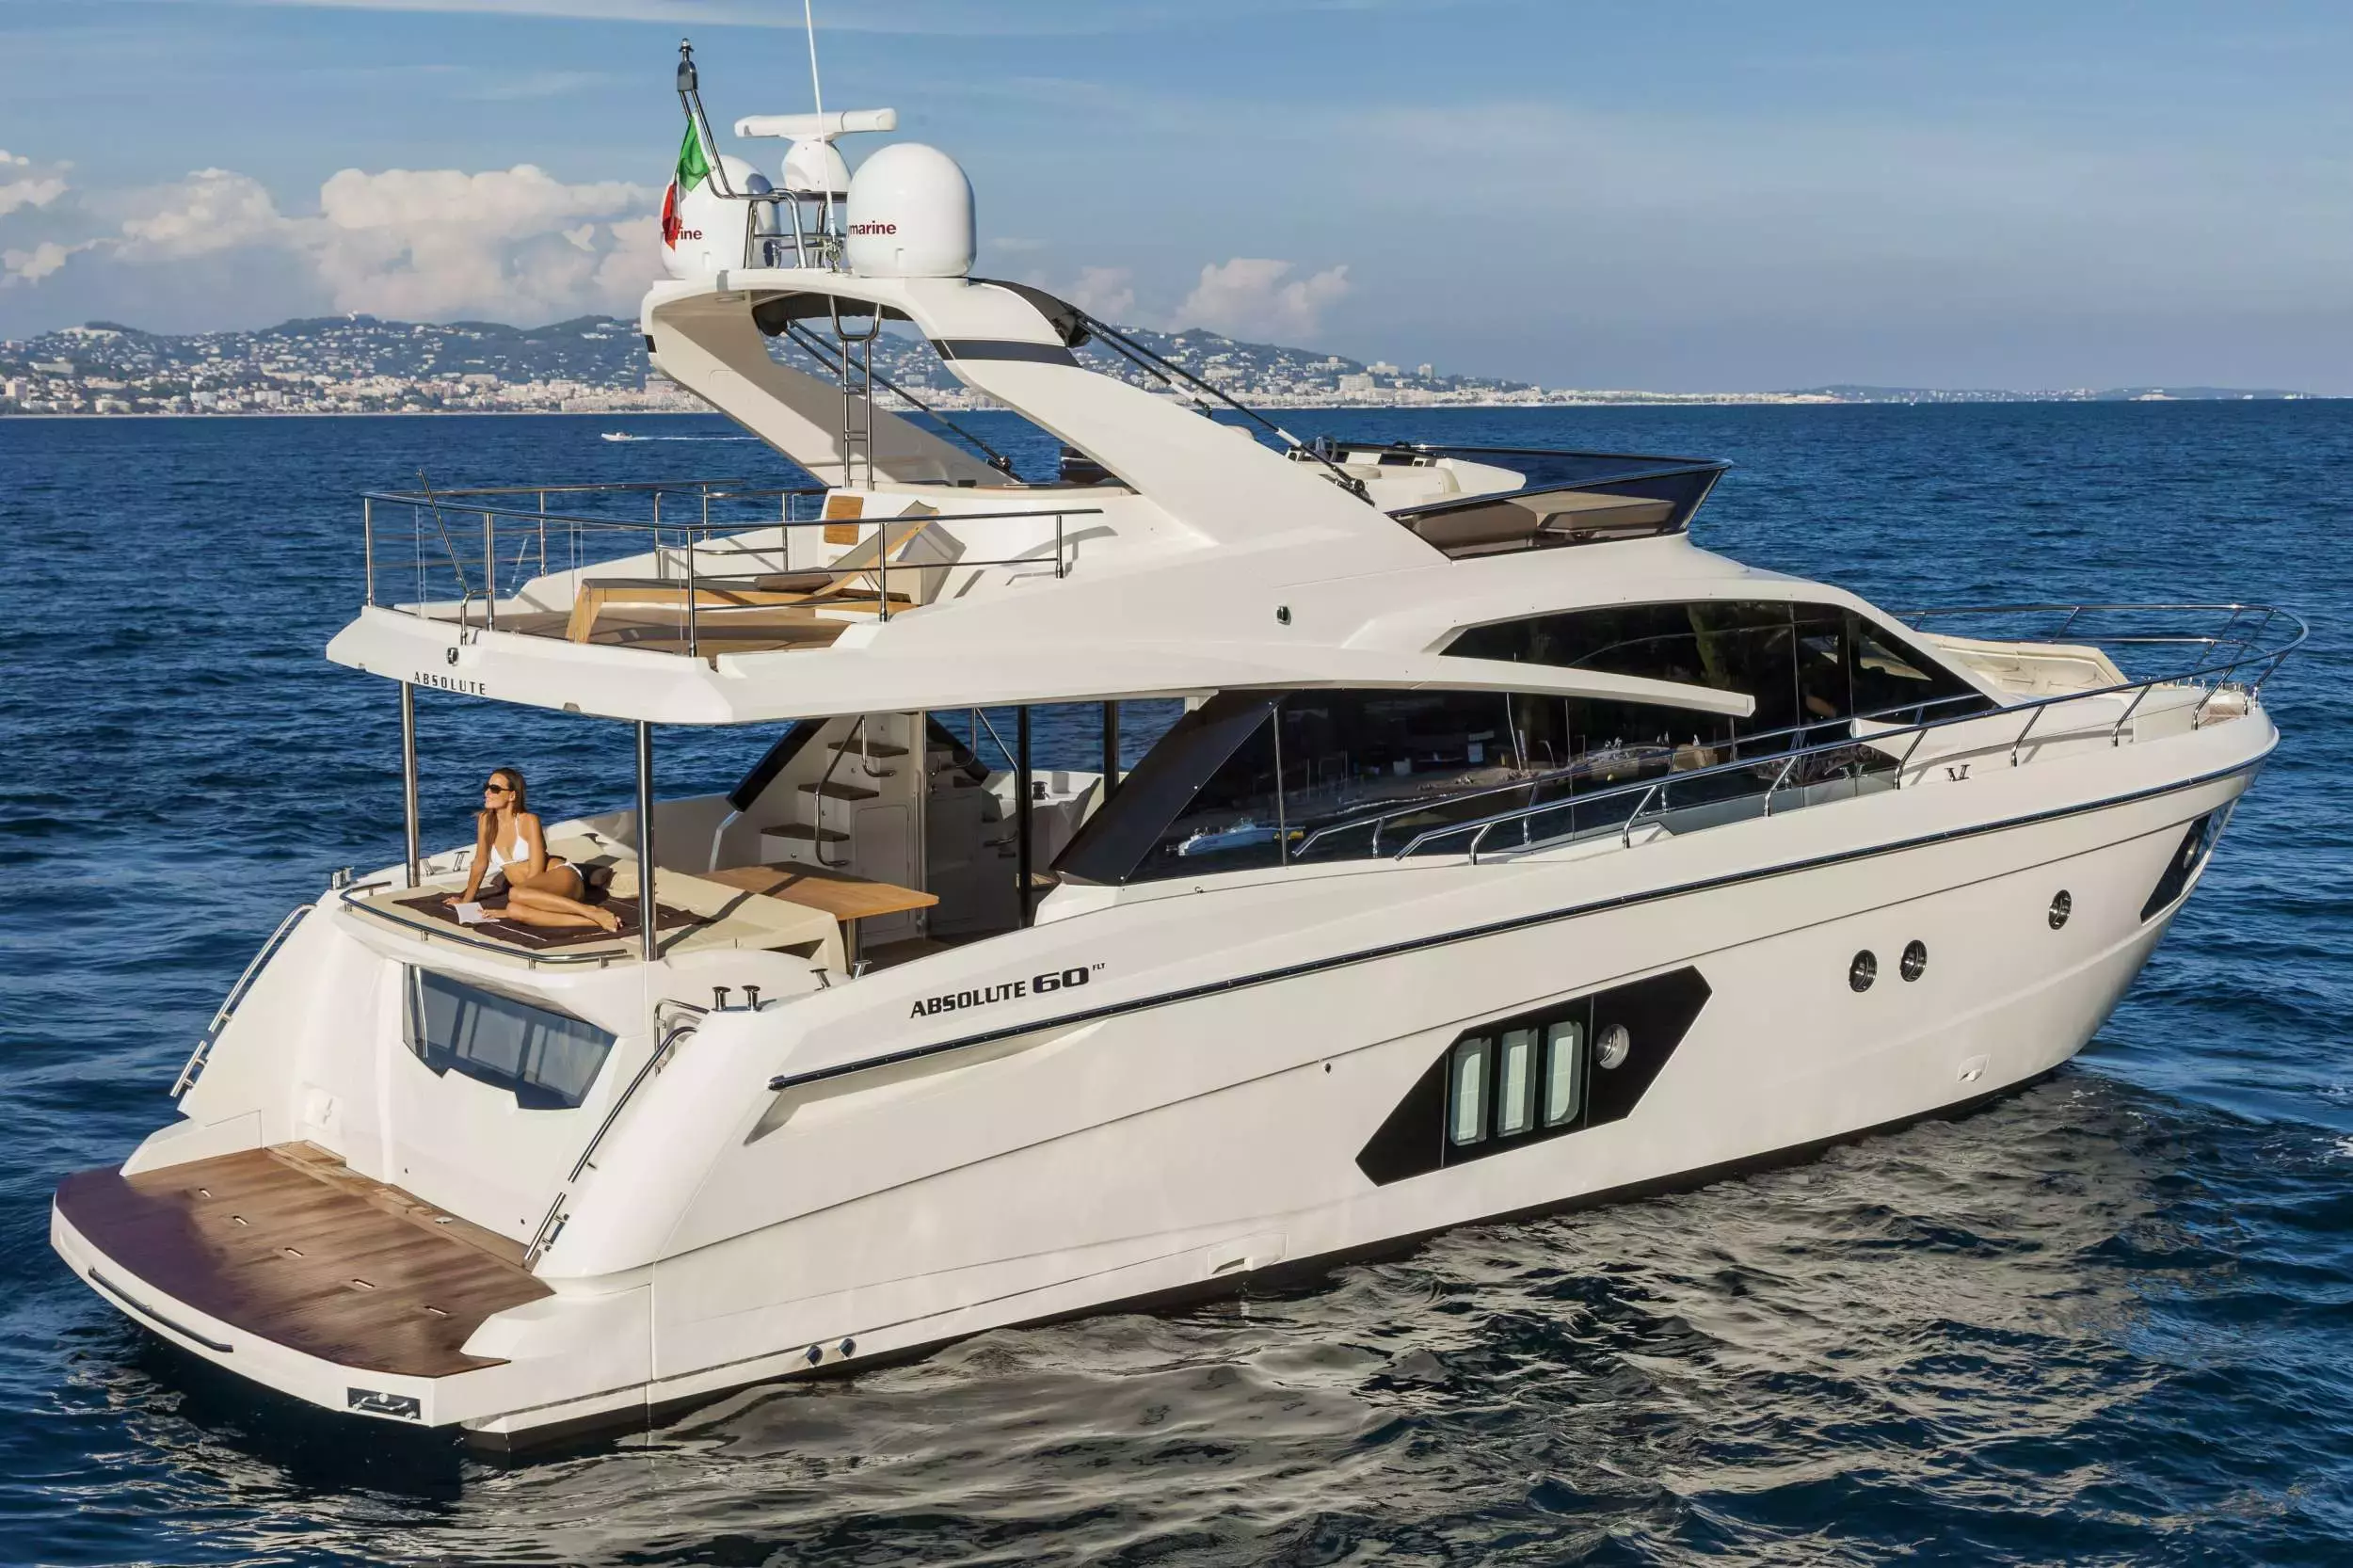 Absolute by Absolute Yachts - Top rates for a Charter of a private Motor Yacht in Monaco